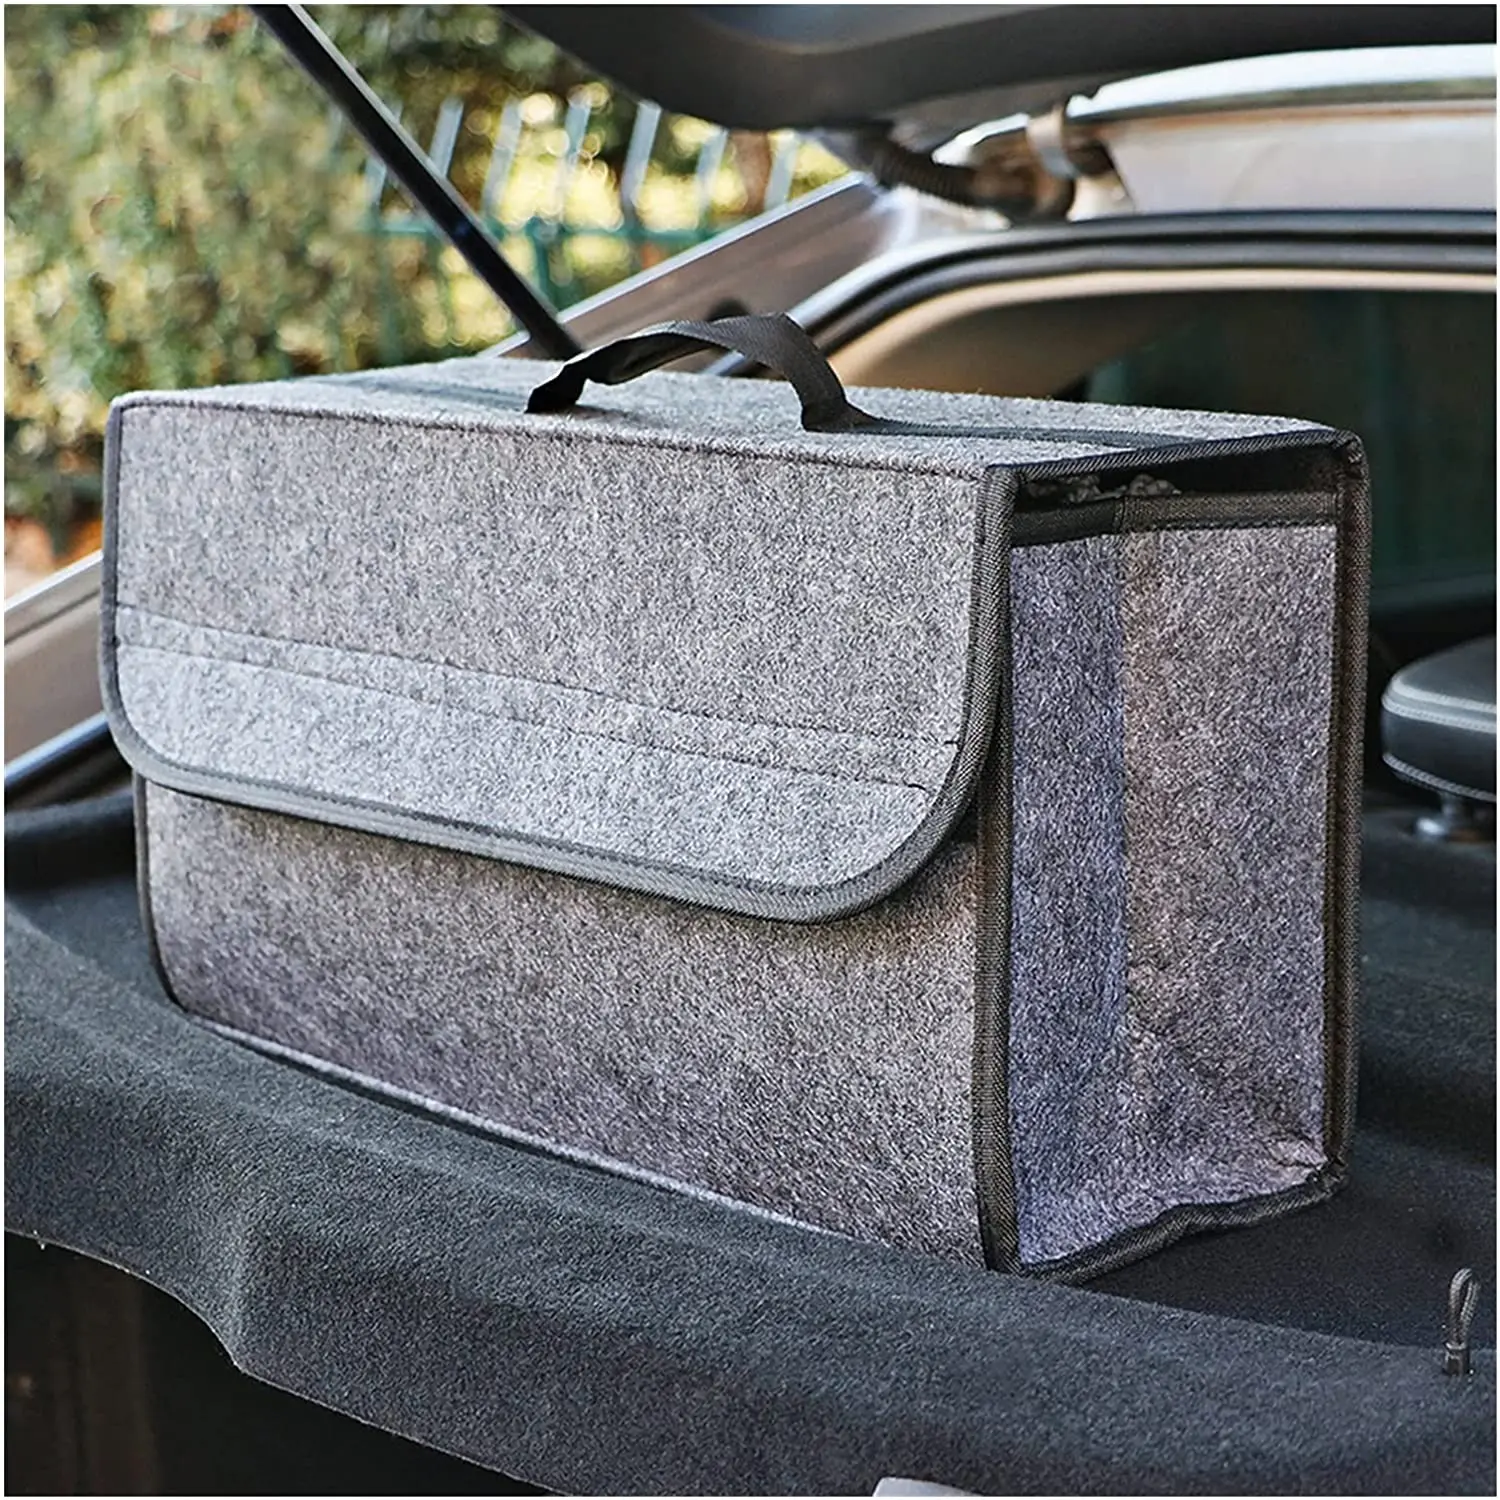 

Car Trunk Organizer Car Collapsible Soft Felt Storage Box Cargo Container Box Trunk Bag Stowing Tidying Holder Multi-Pocket